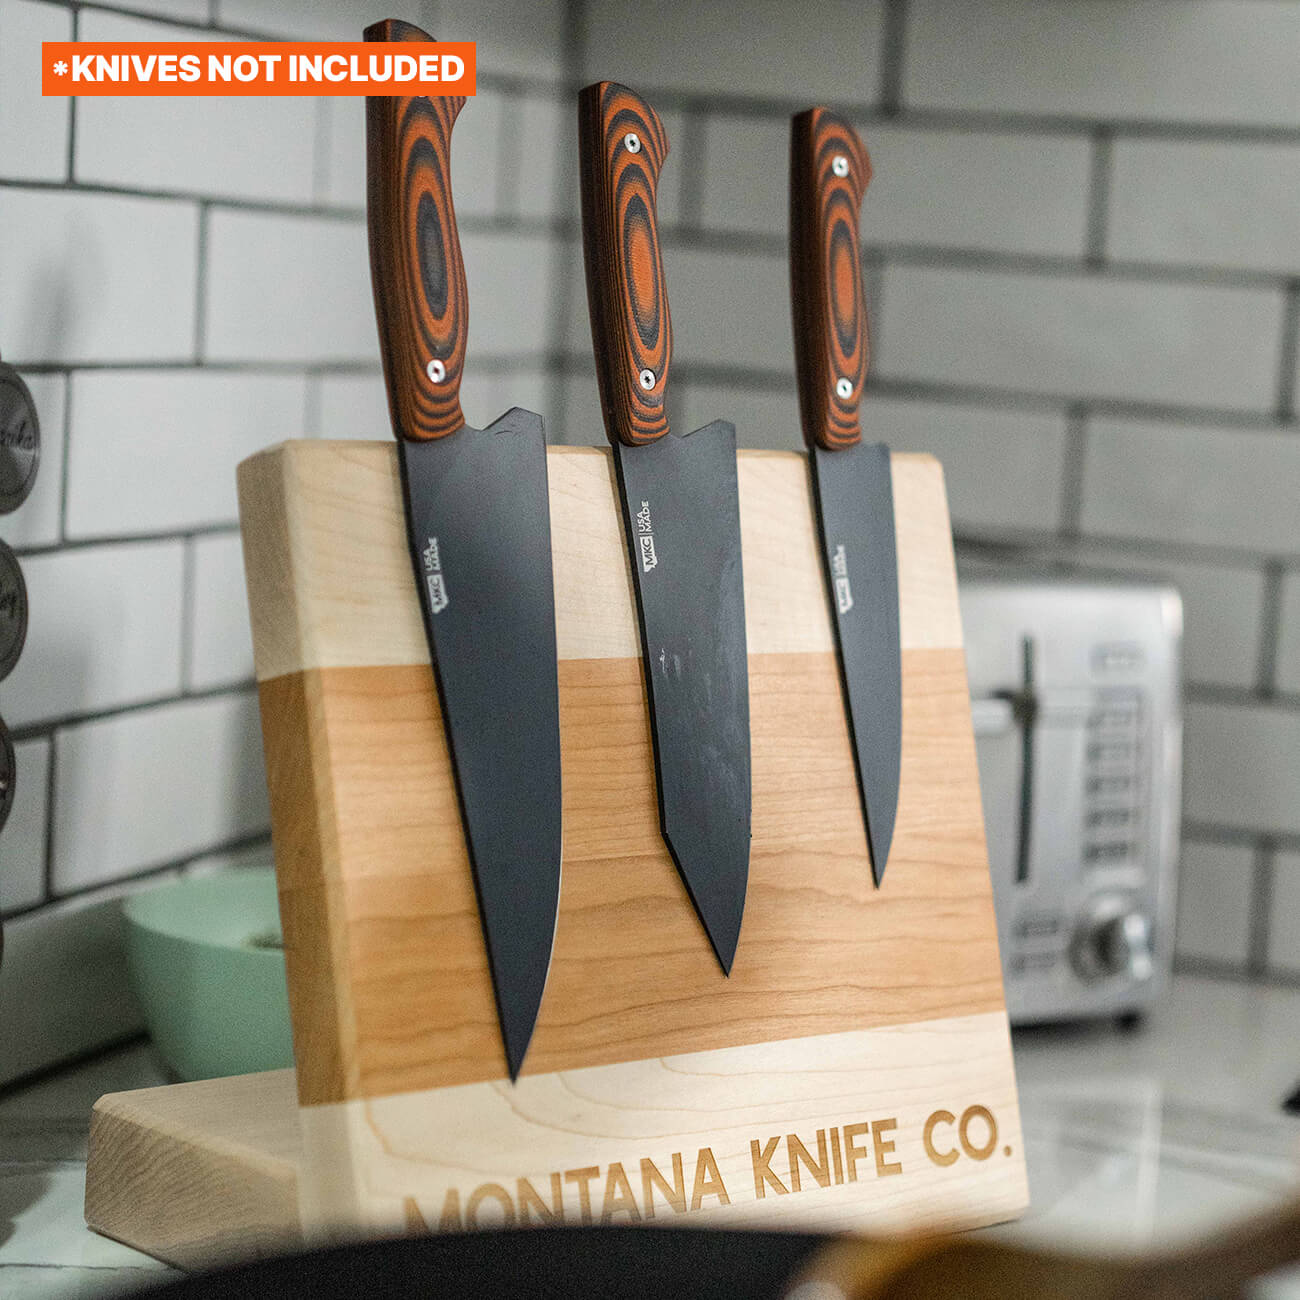 LIMITED EDITION MKC CULINARY KNIFE STAND - LIGHT WOOD FINISH